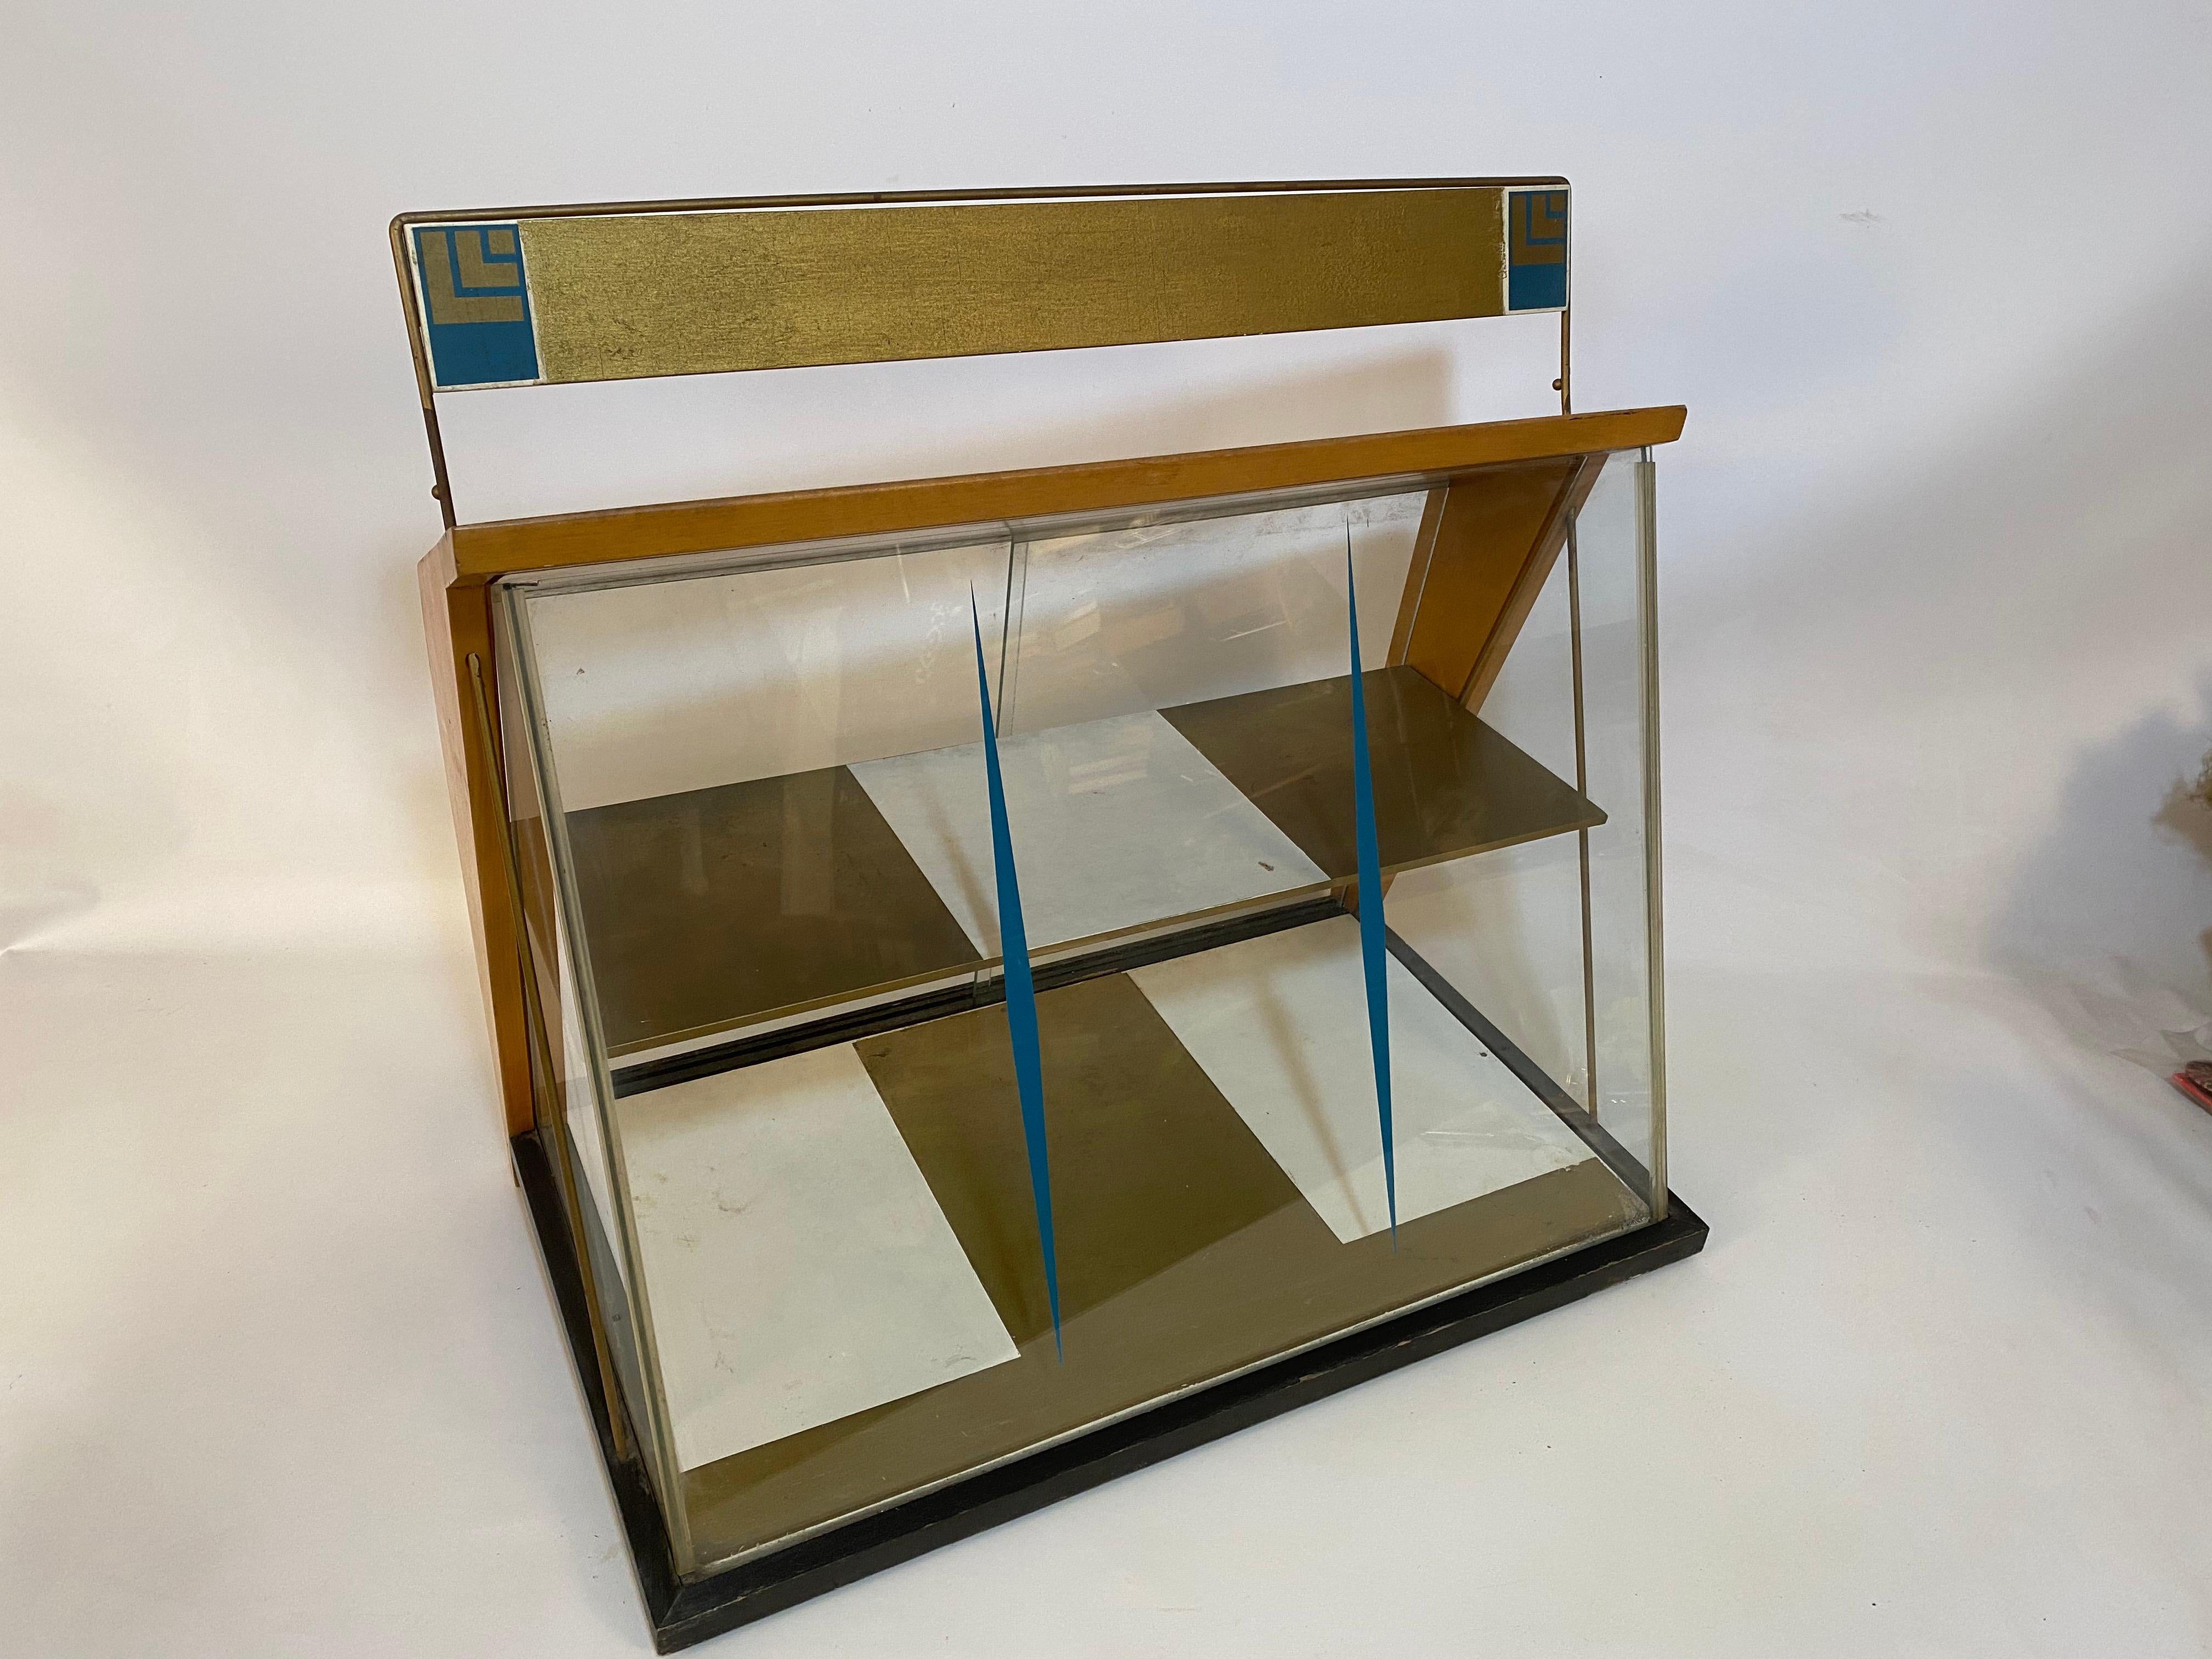 Amazing 1960s glass, wood and acrylic counter top display cabinet/showcase. A wonderful piece for your delicate items and collectibles. Glass front and side panels, painted wood shelves with two clear acrylic sliding doors. The interior is painted